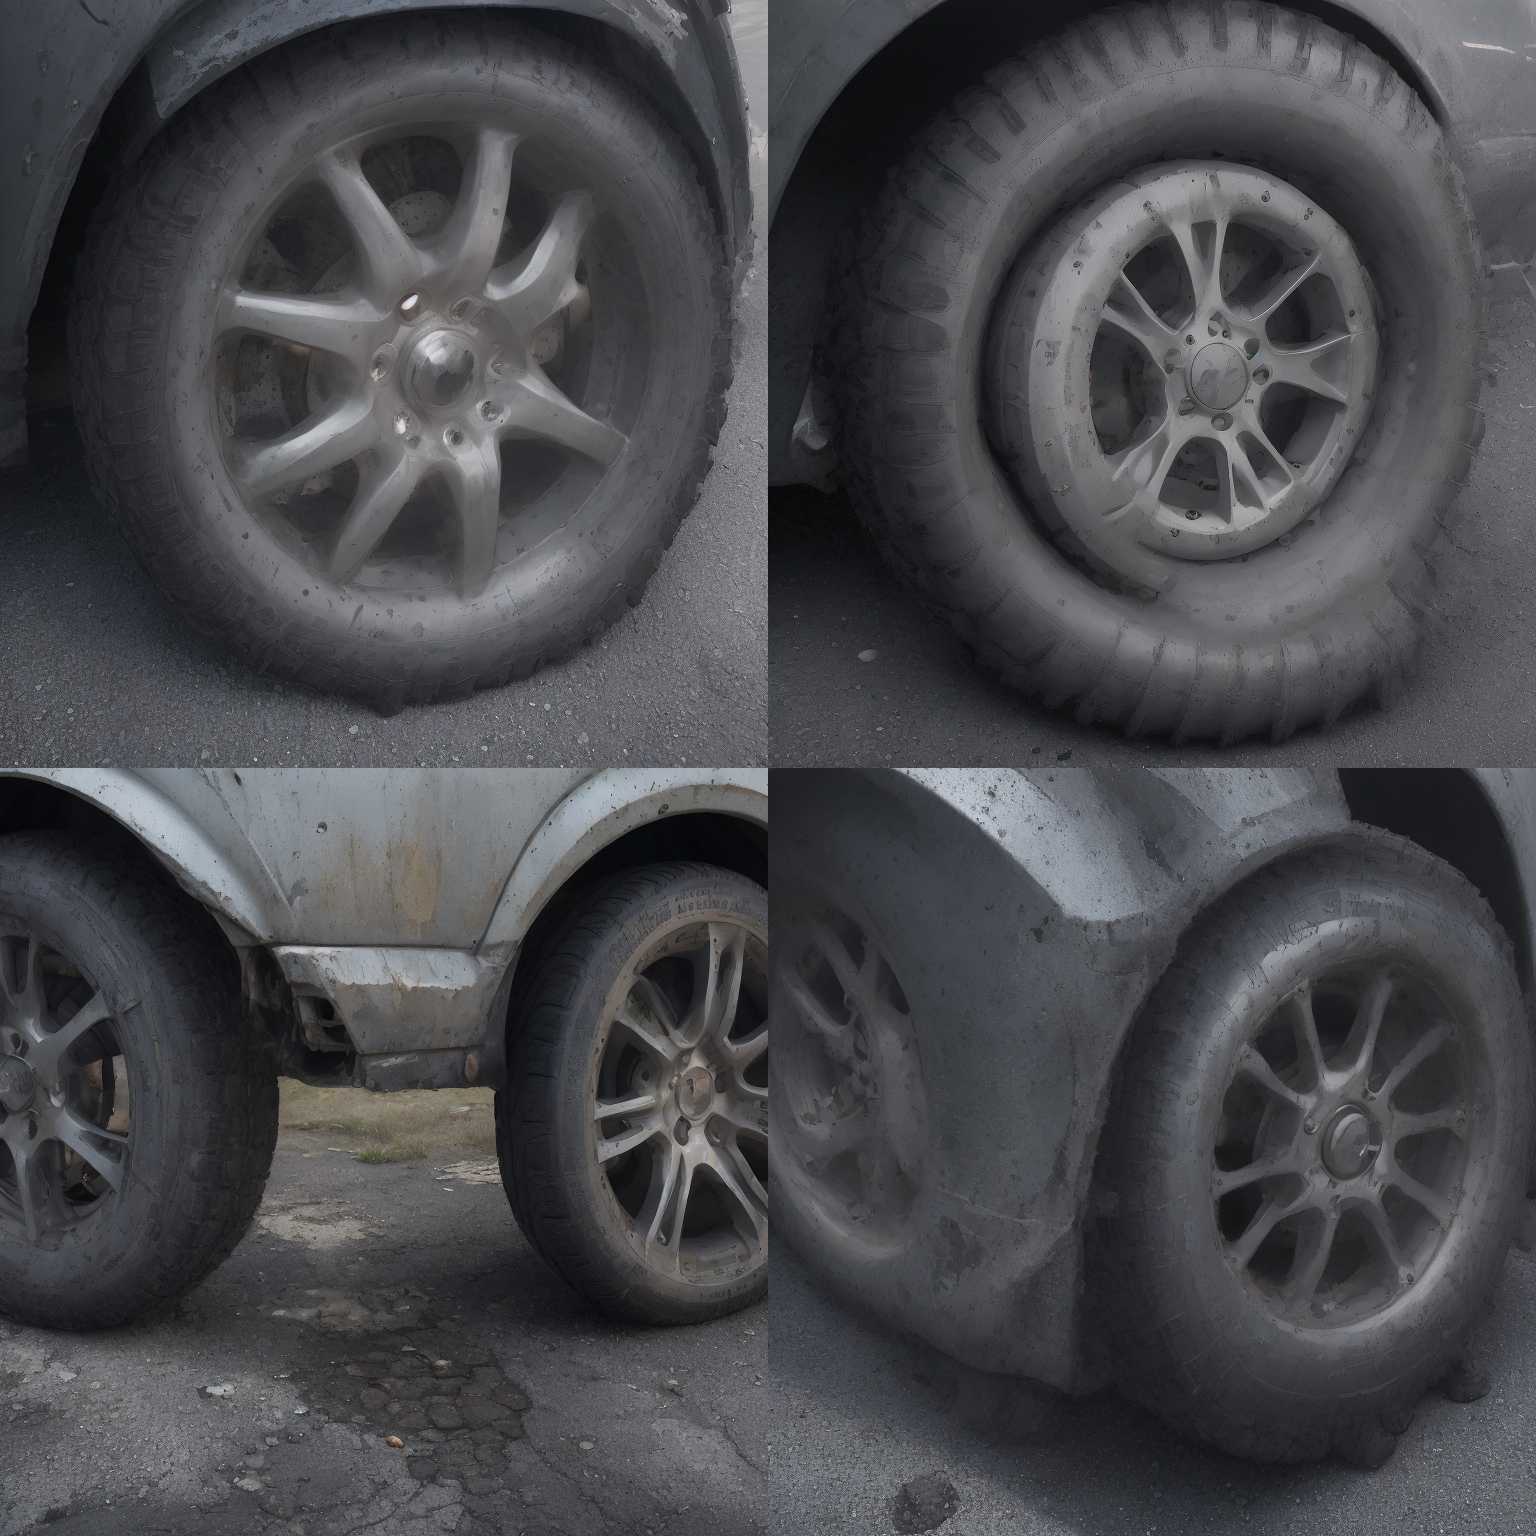 A punctured car tire